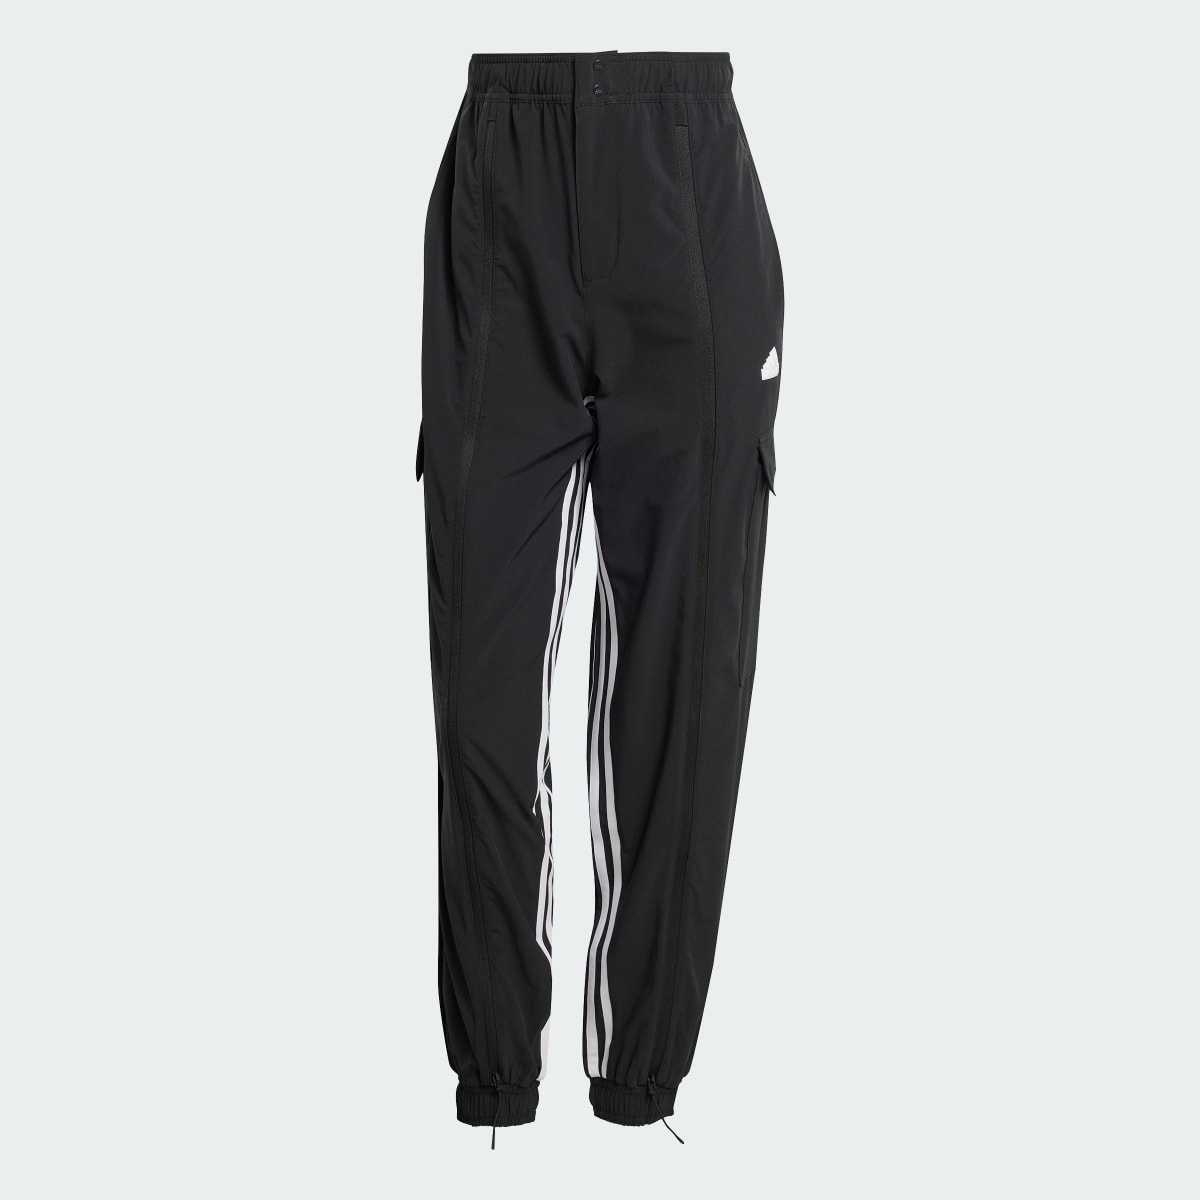 Adidas Express All-Gender Cargo Tracksuit Bottoms. 4